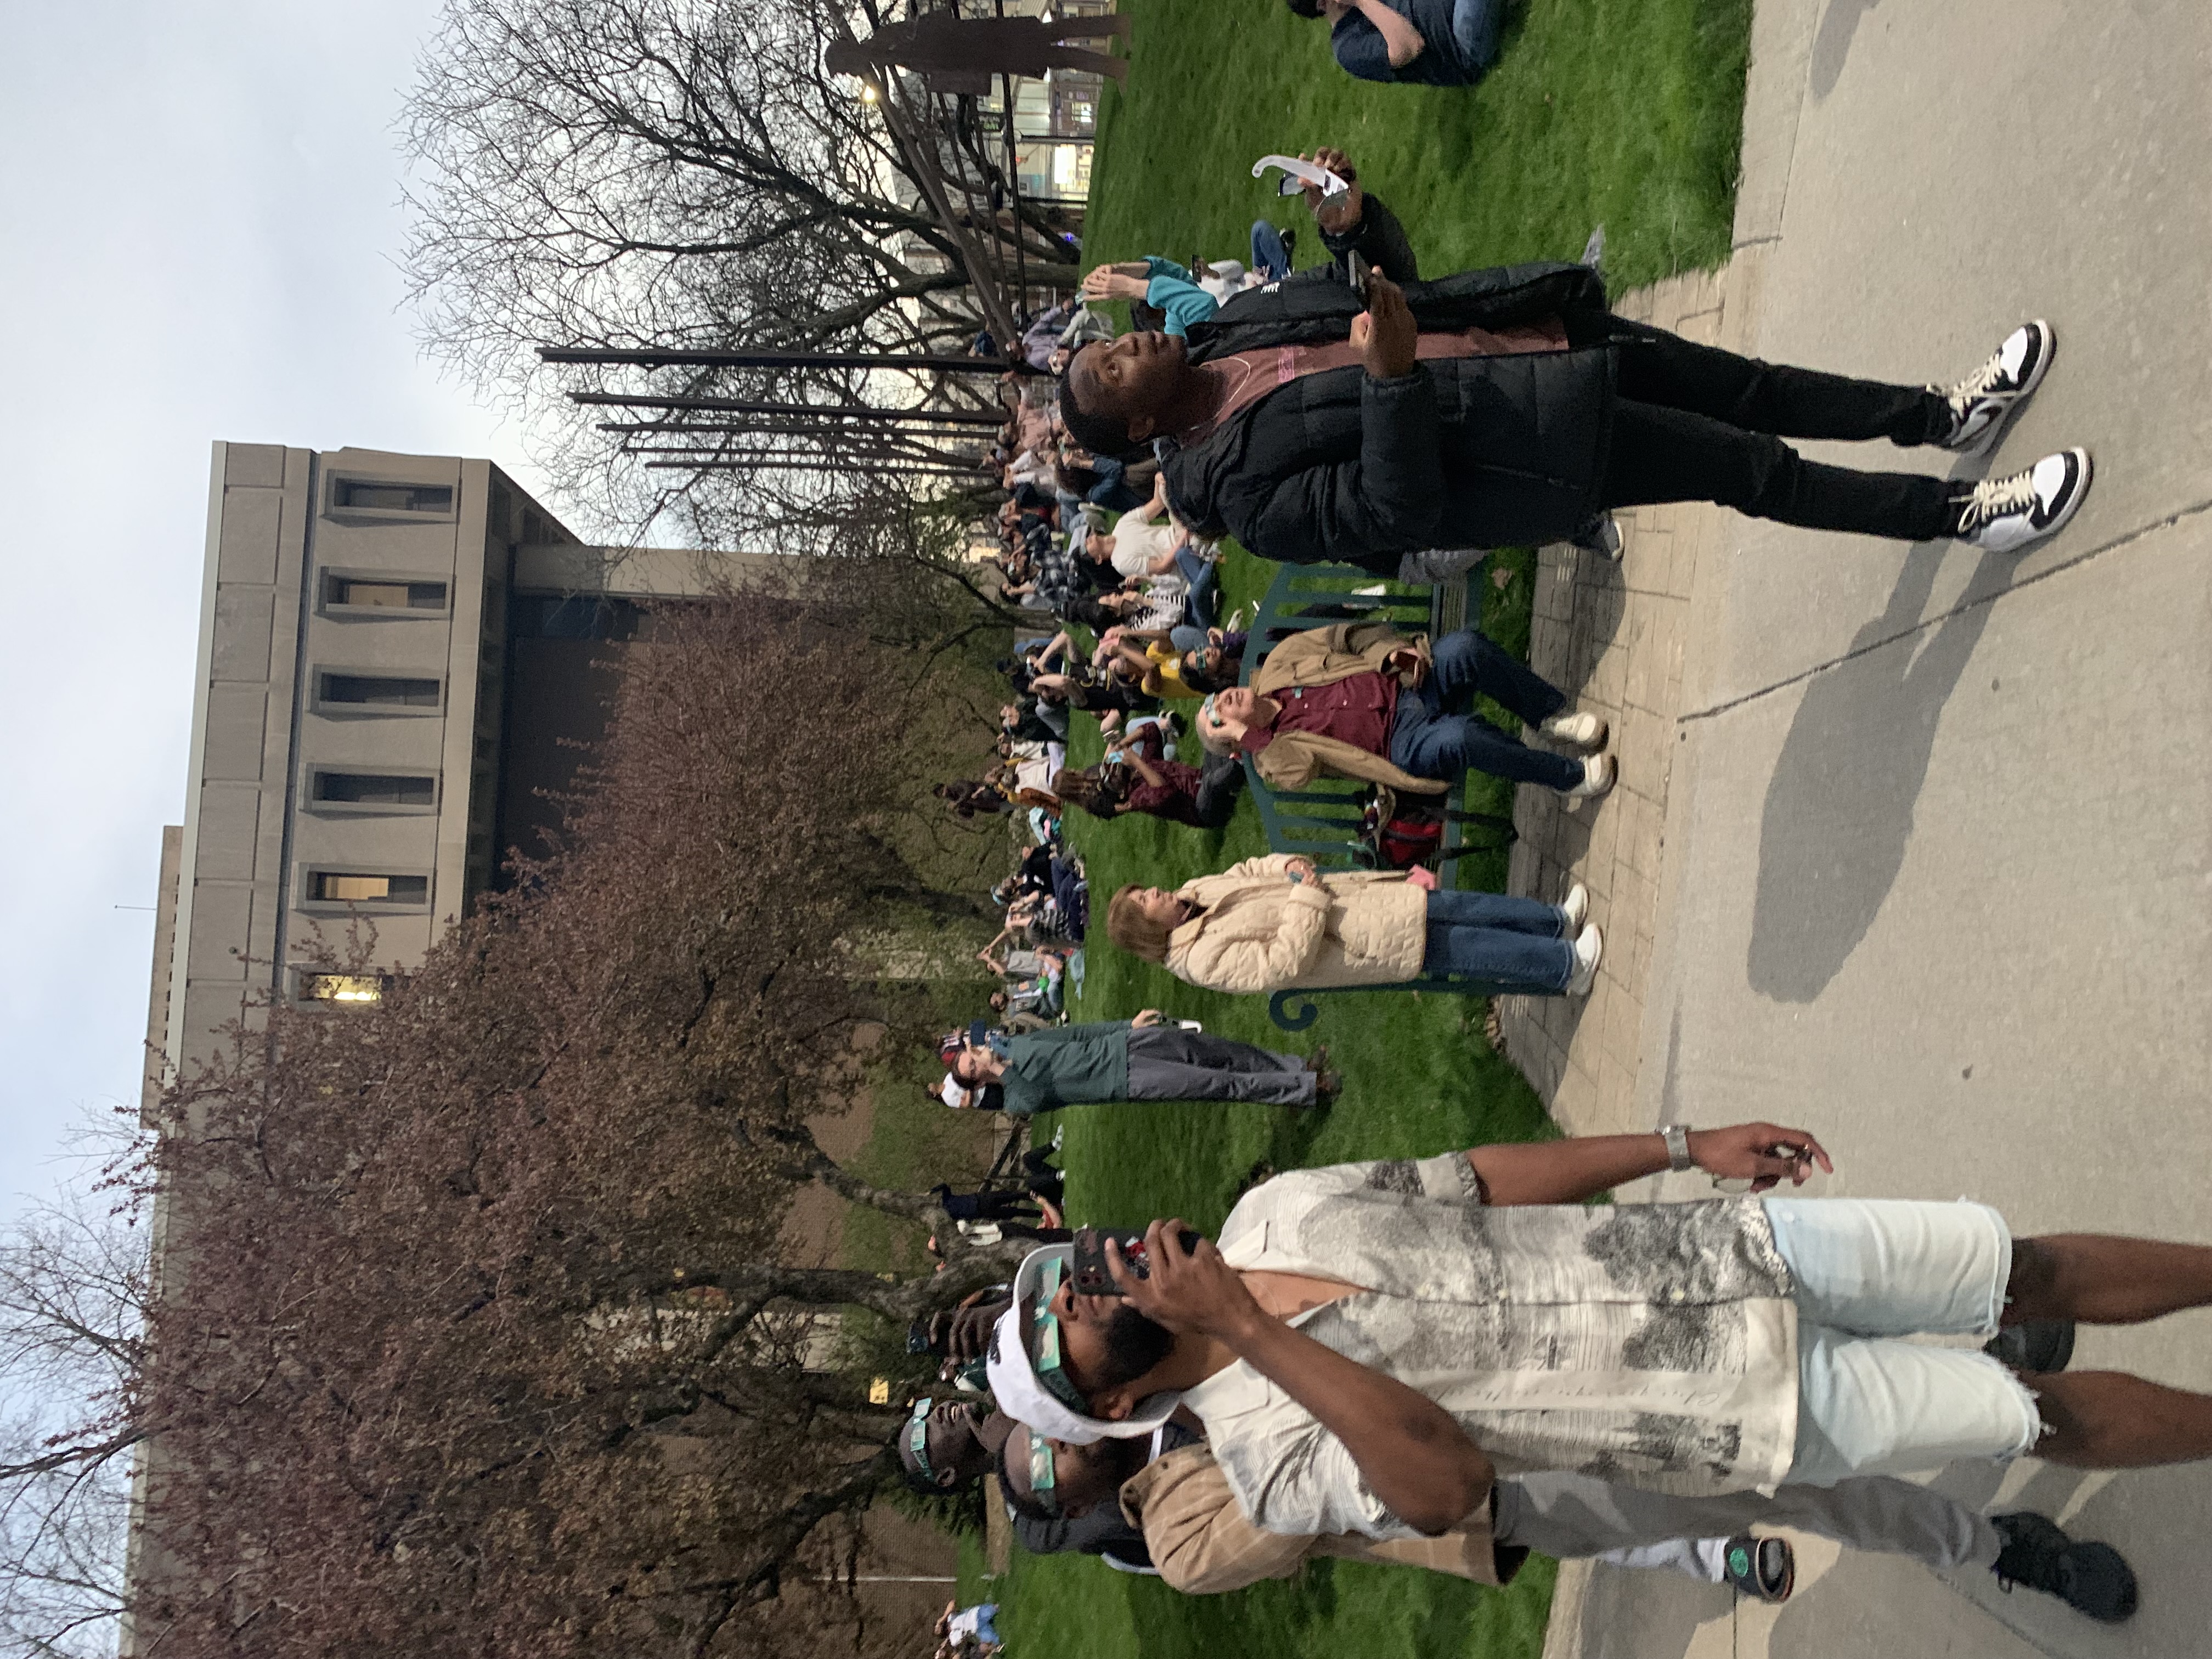 Crowds at the CSU Campus observation site